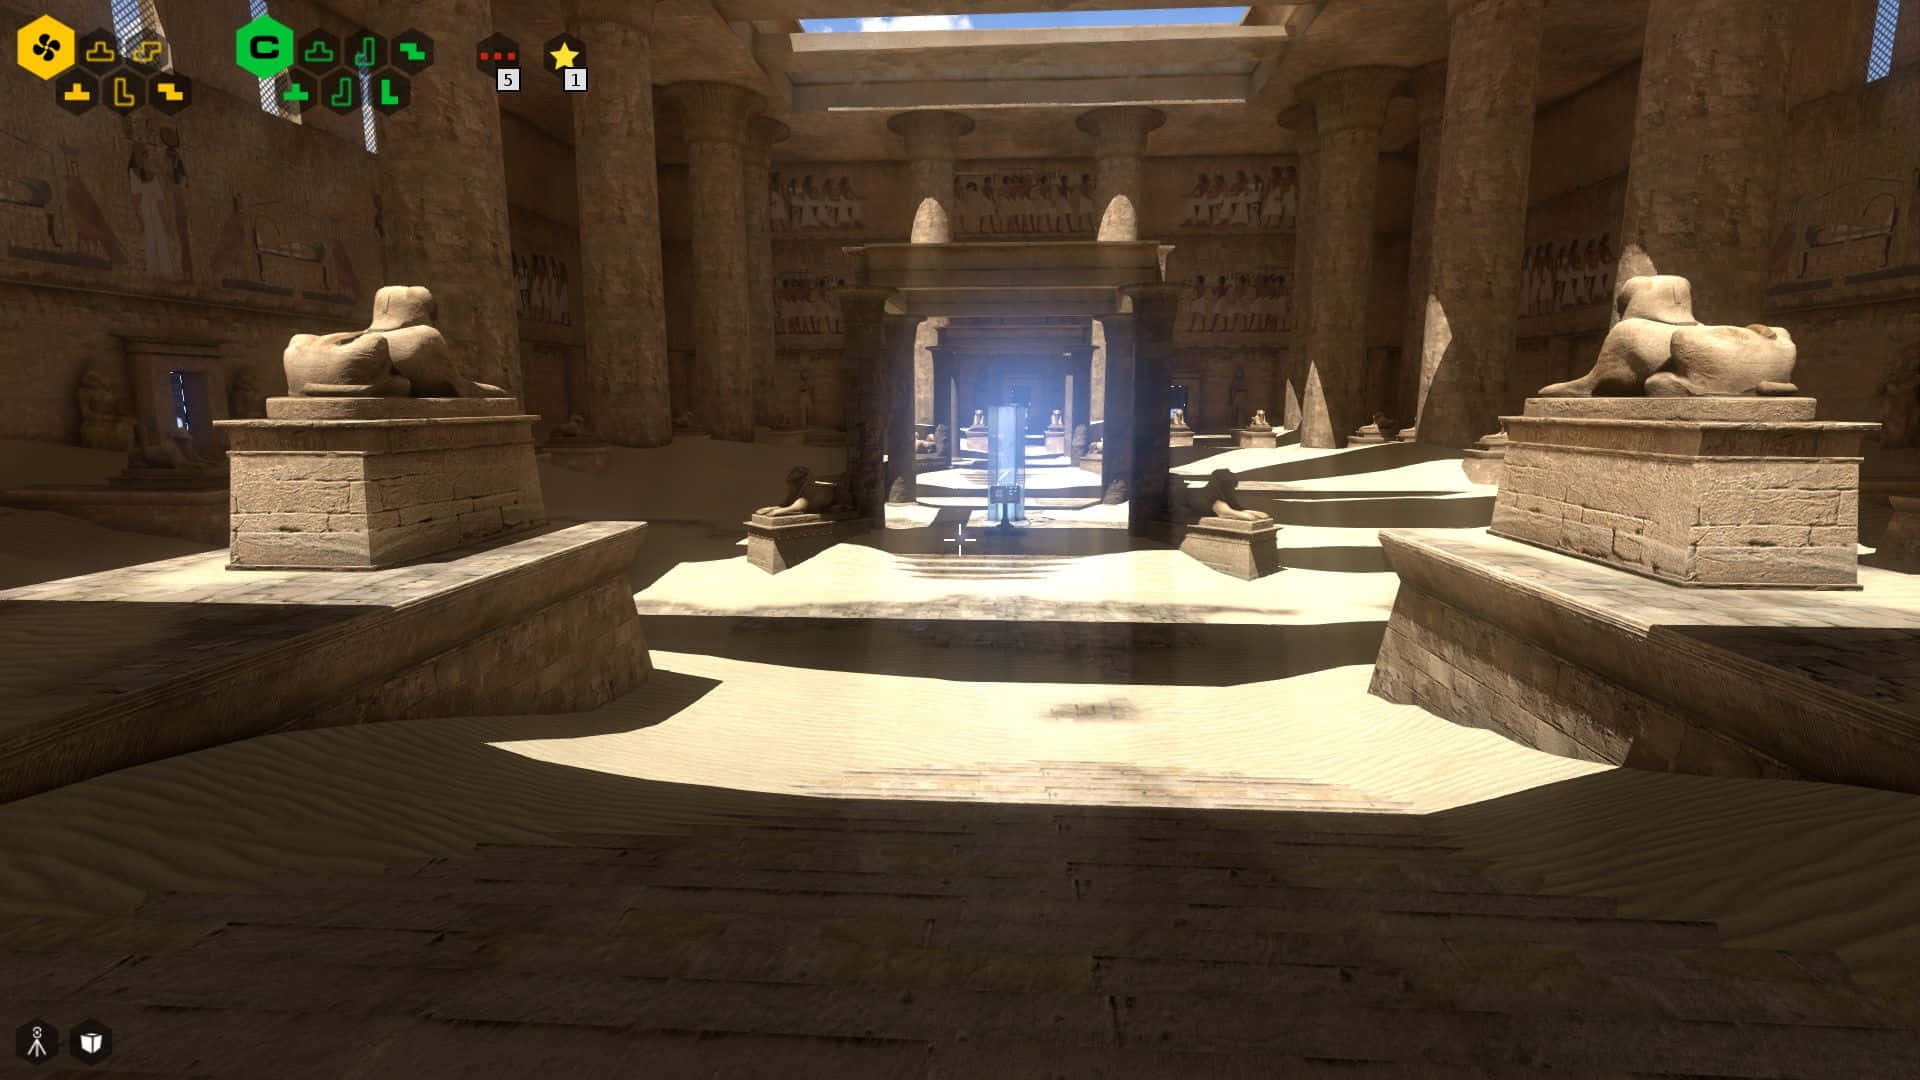 The Tomb In The Talos Principle Background